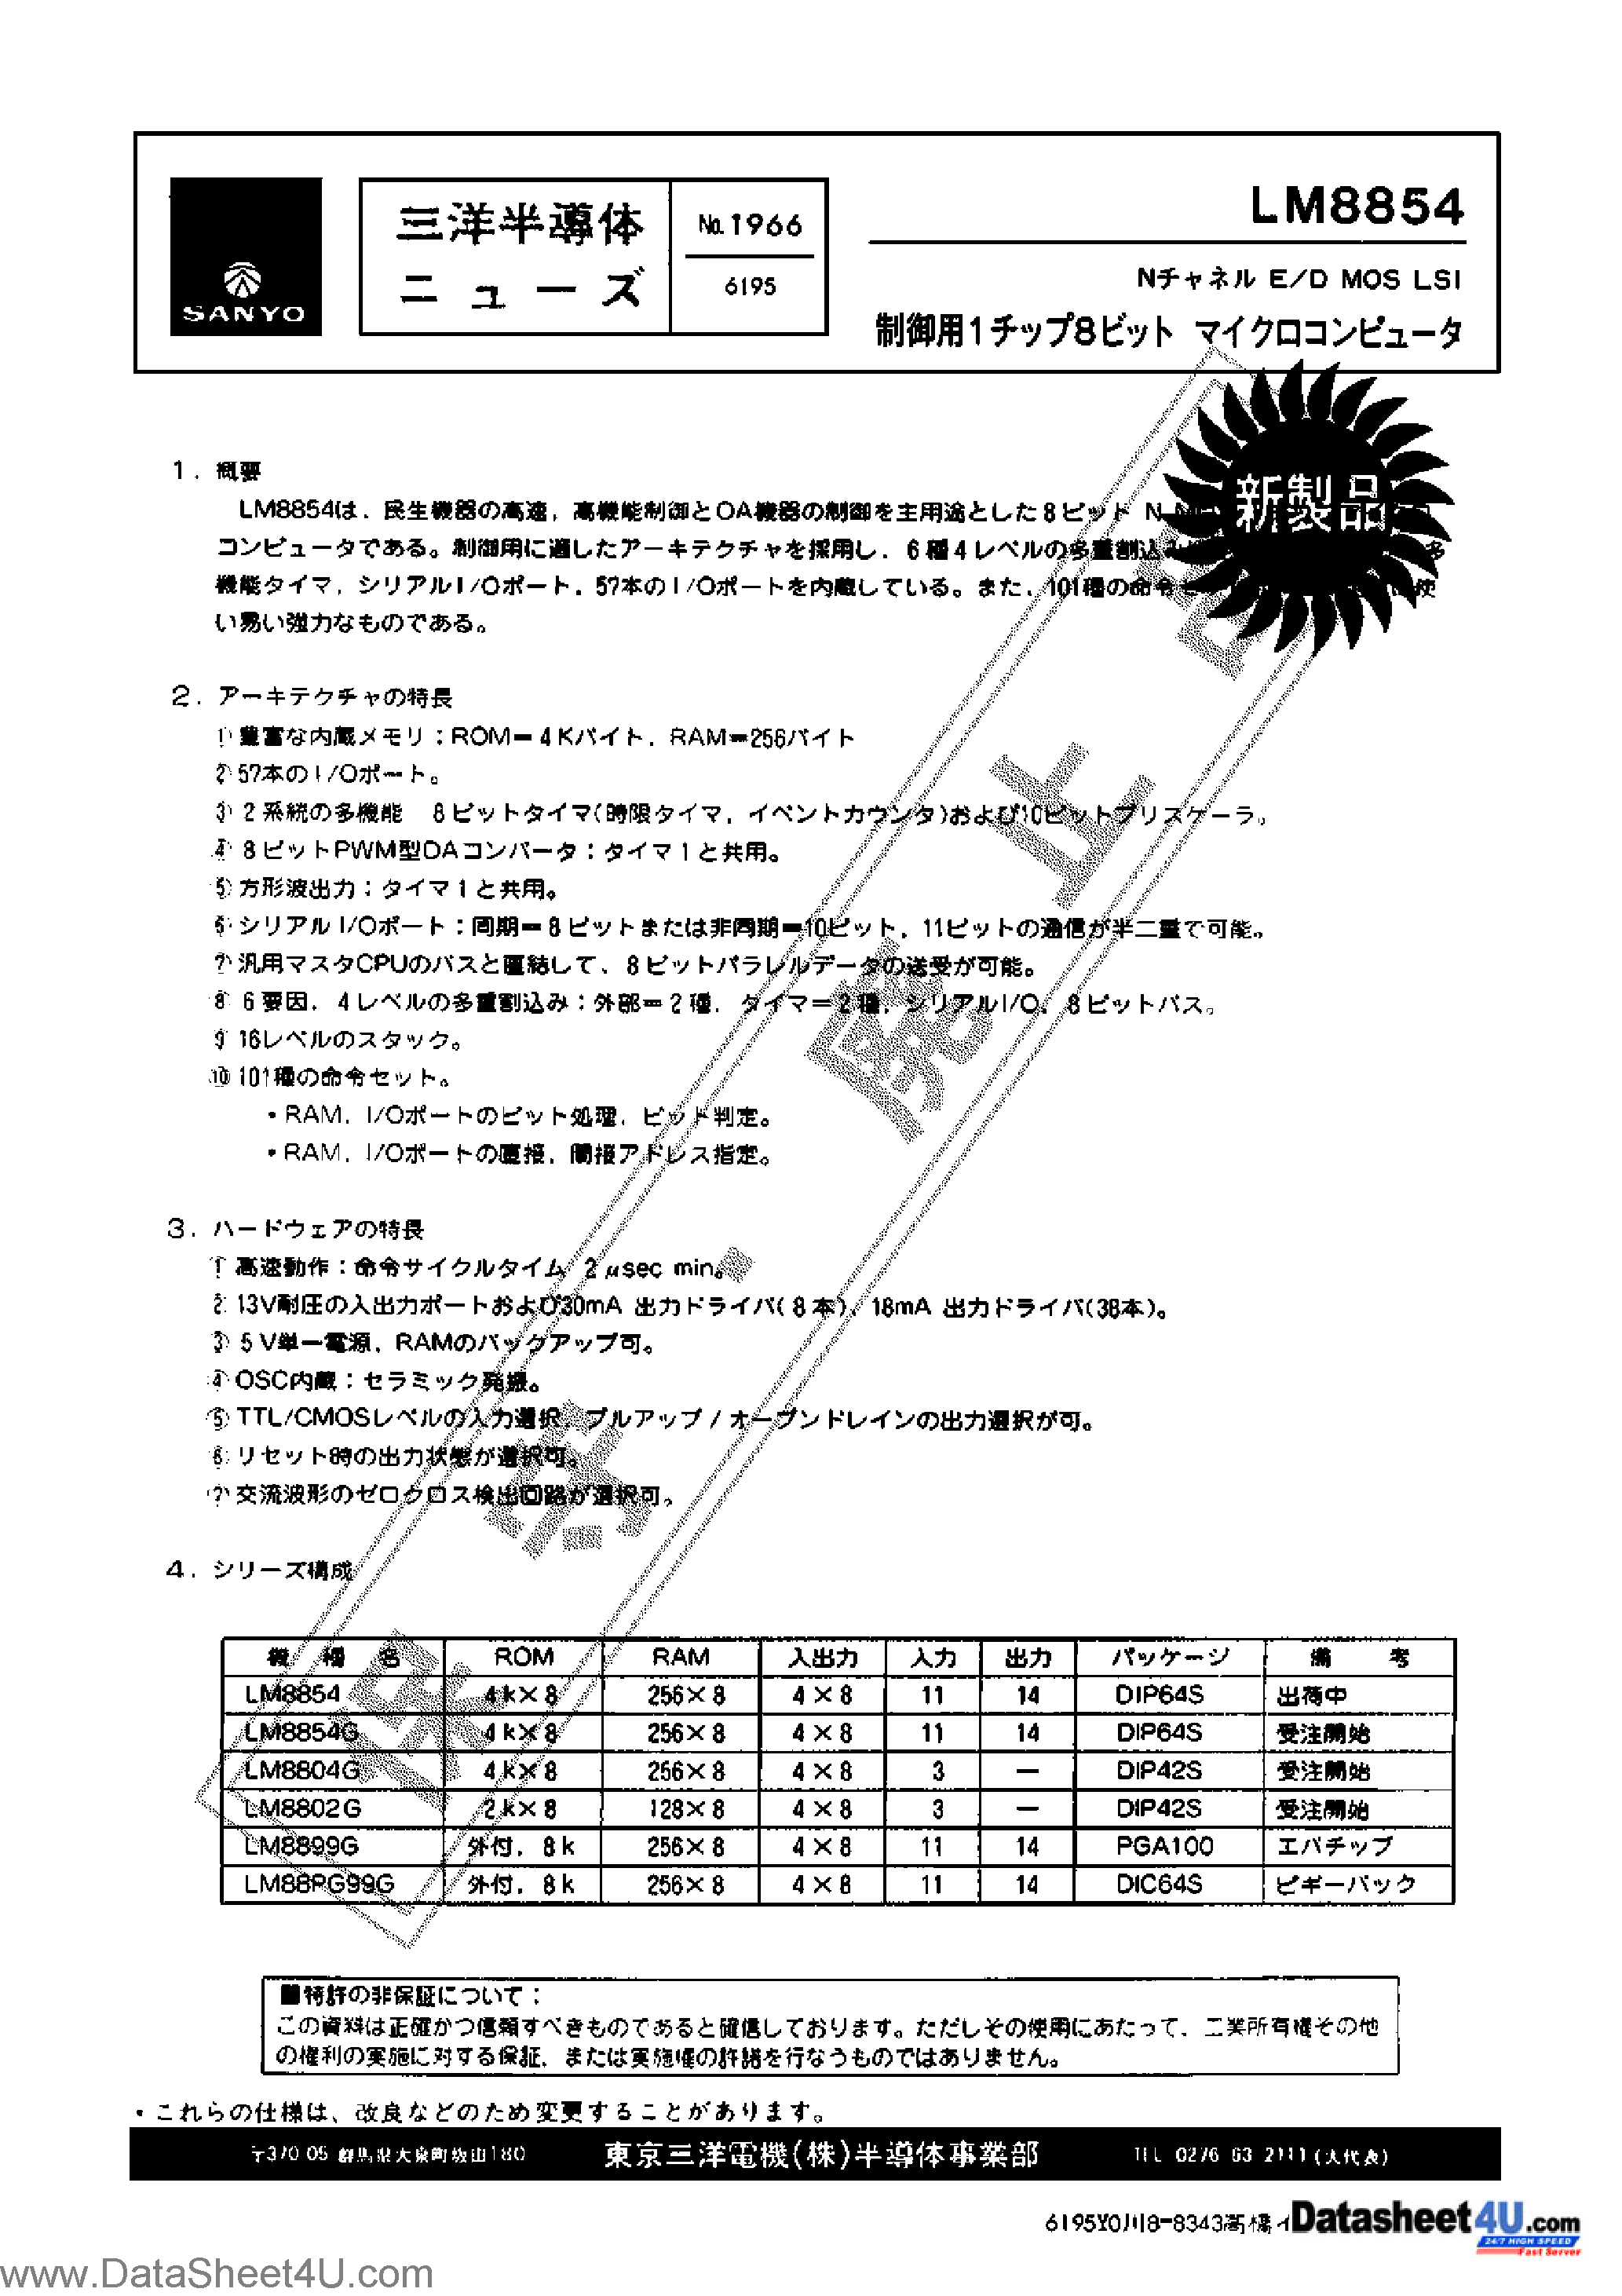 Datasheet LM8854 - E/D MOS LSI page 1